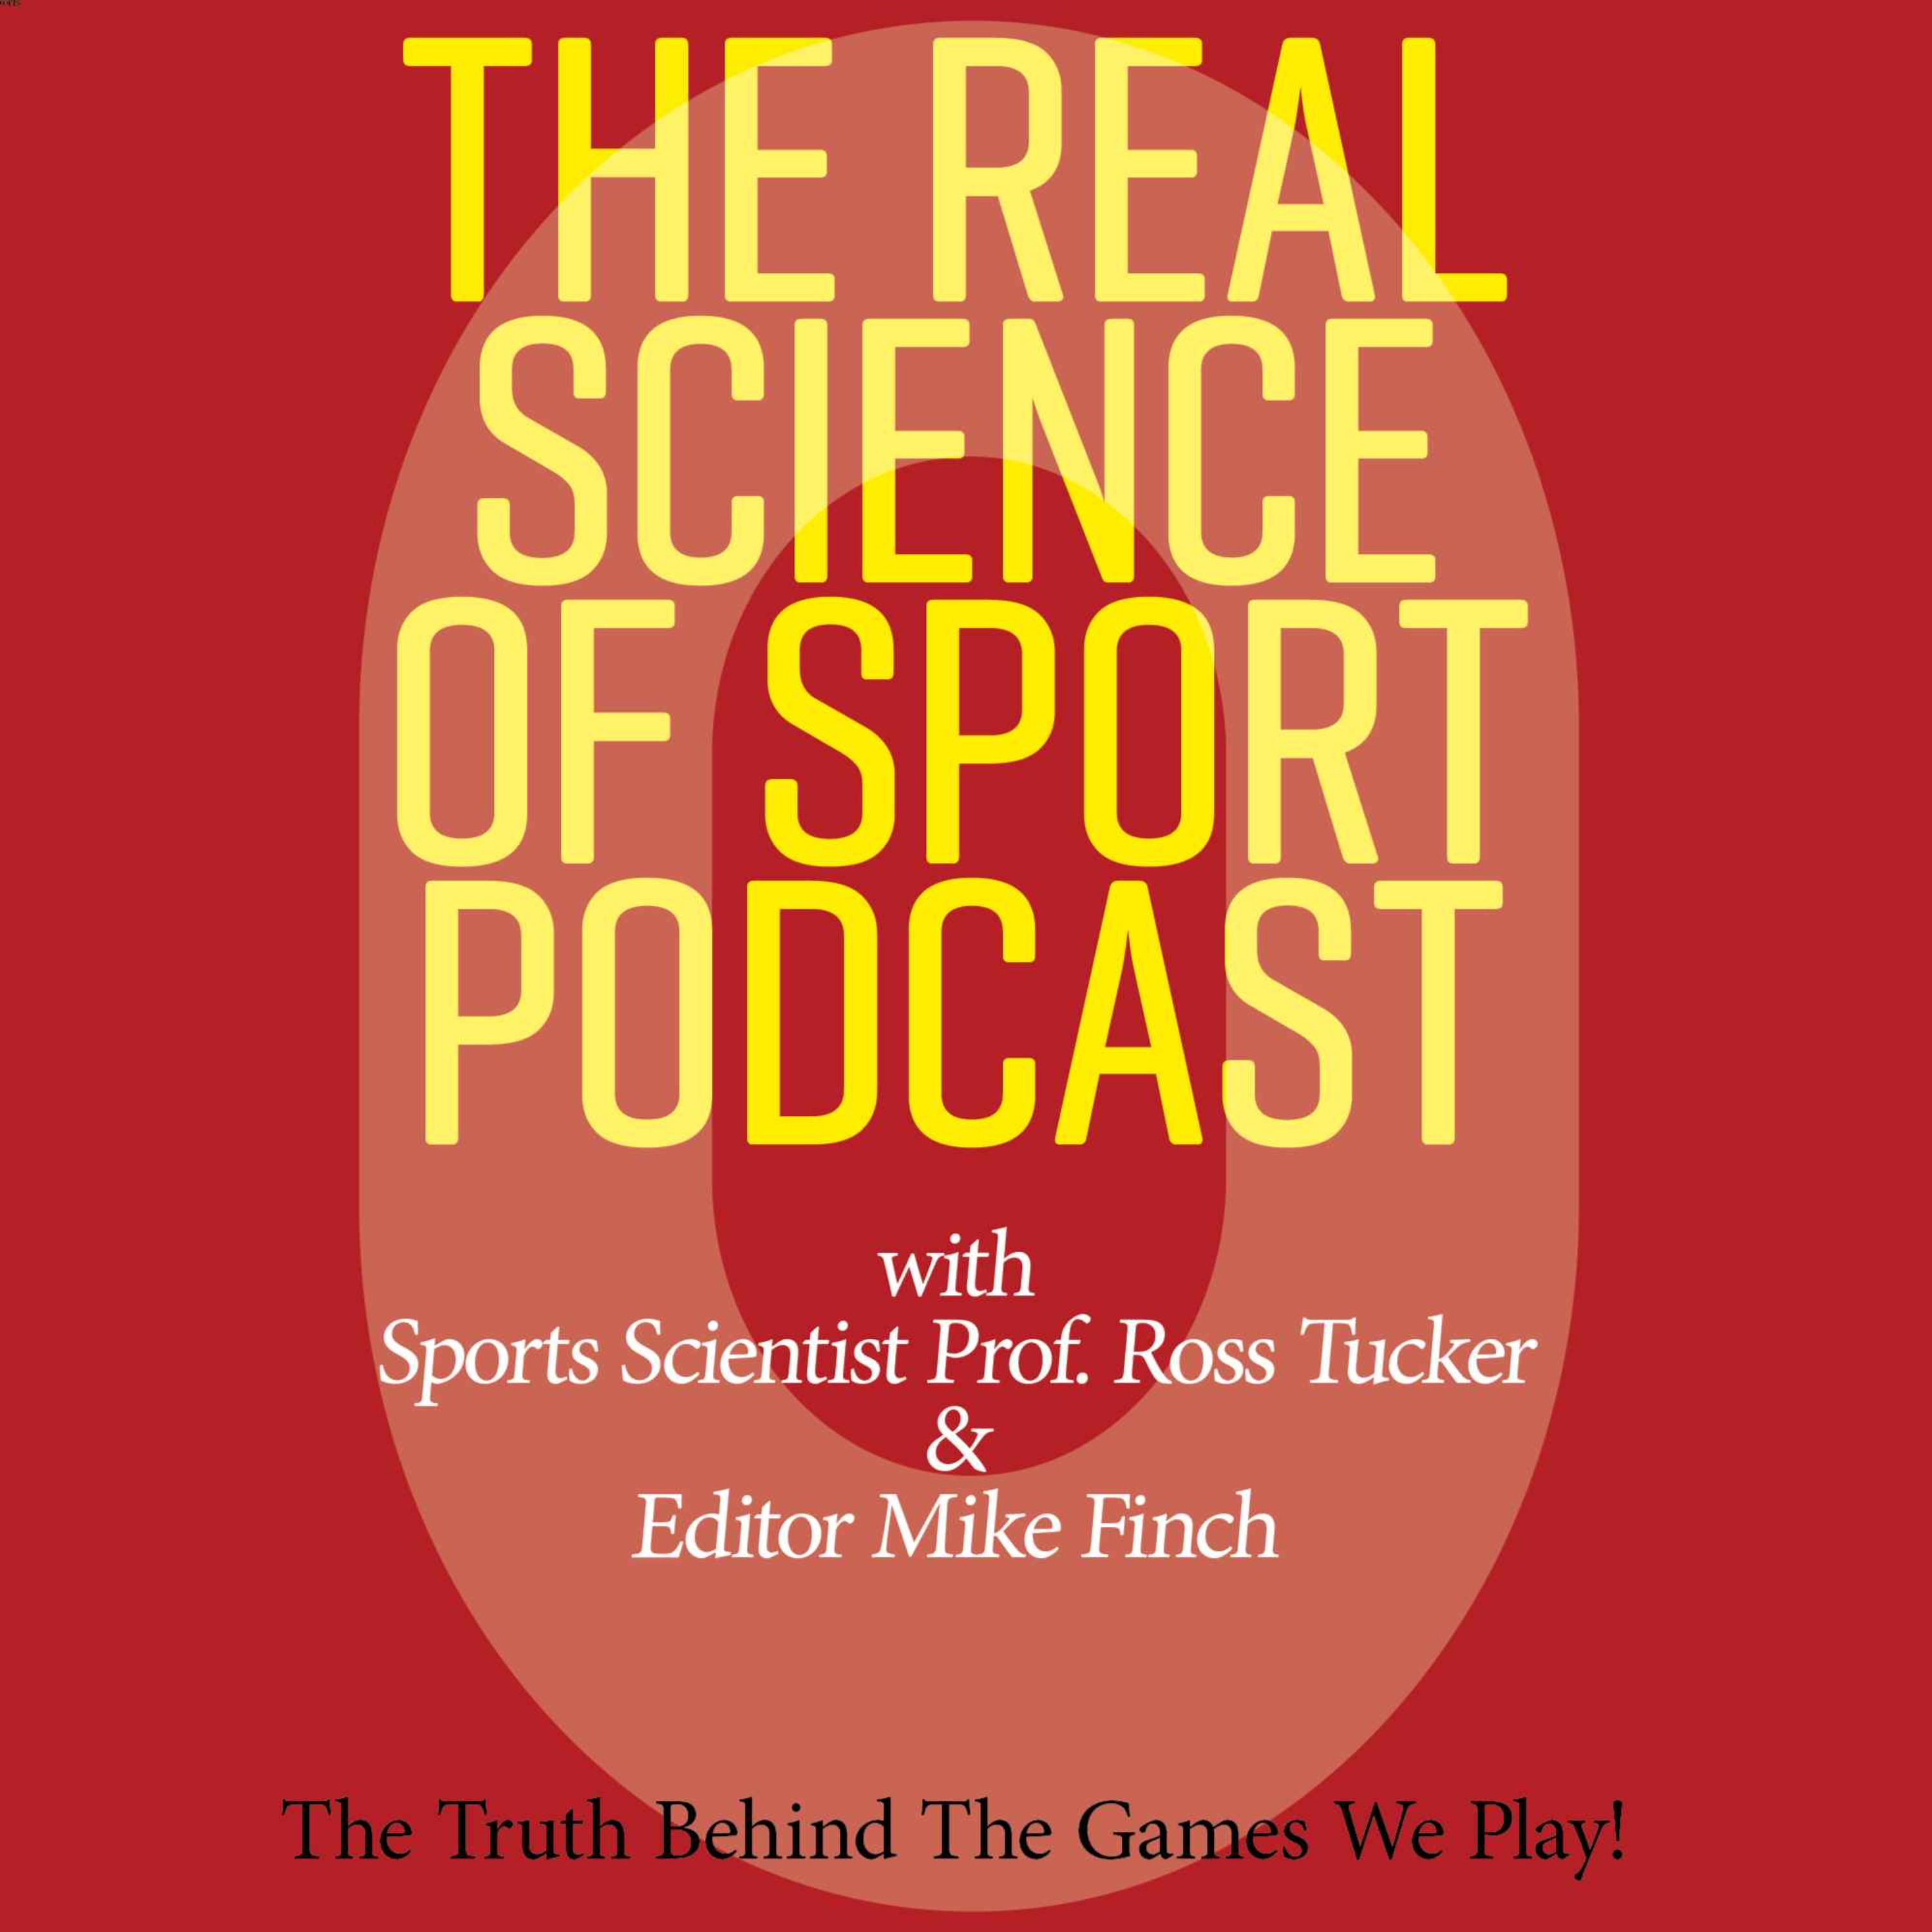 S3 E20: THE COACHES:  Neal Henderson - Secrets of Physiology and Psychology in Endurance Sport